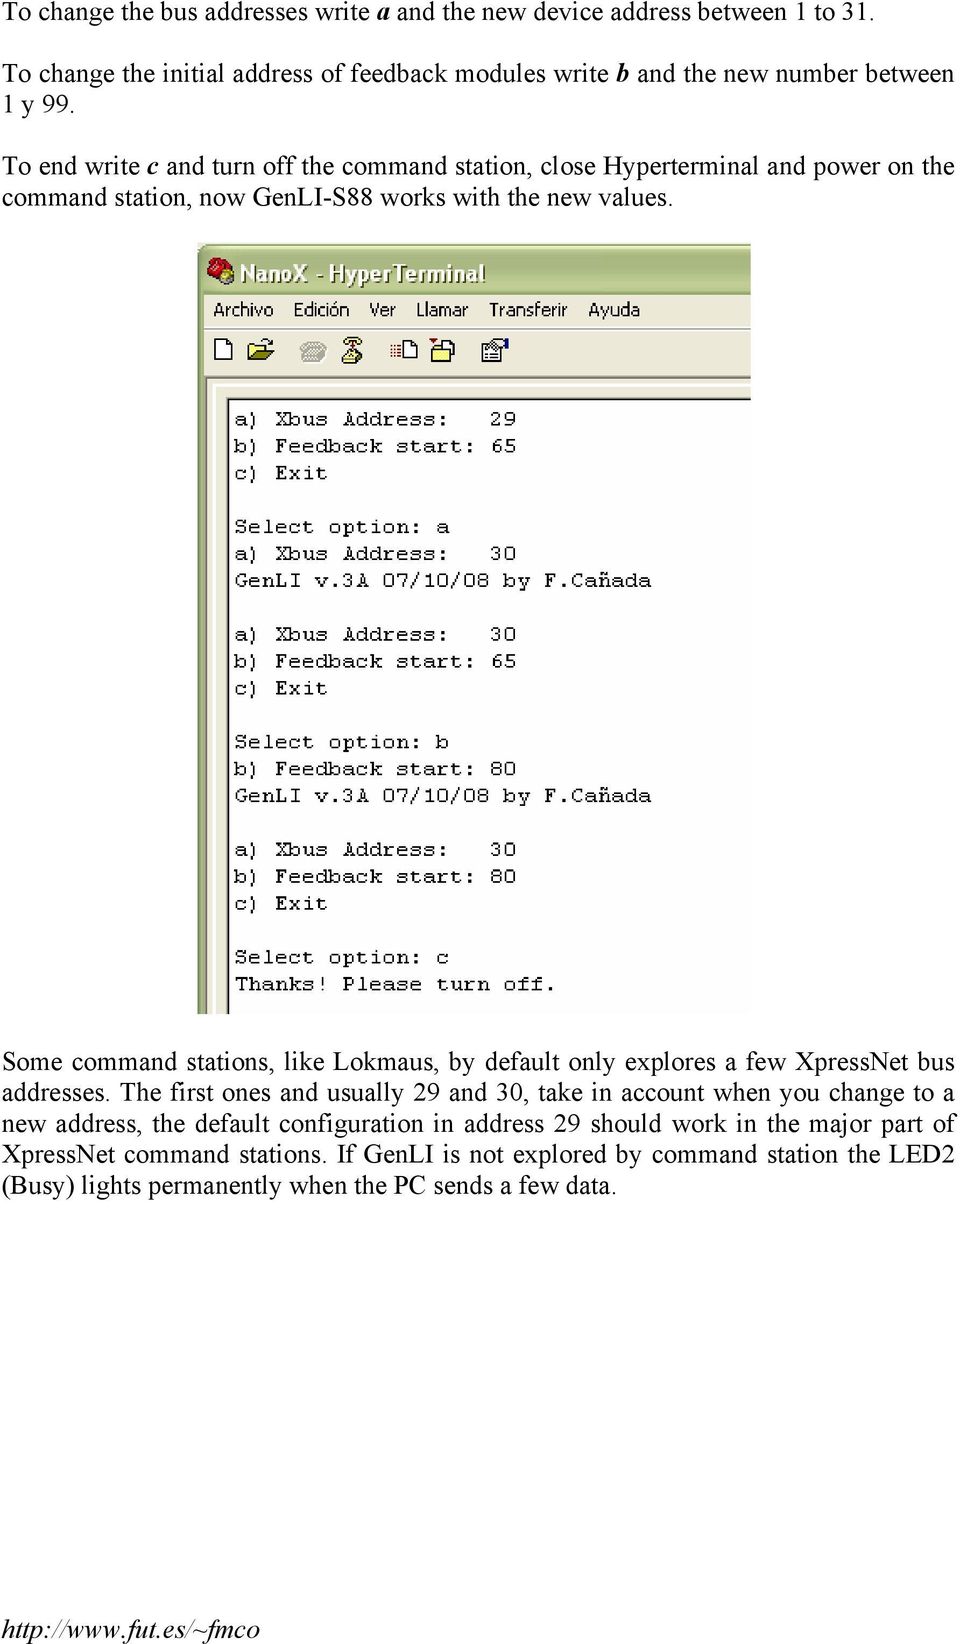 Some command stations, like Lokmaus, by default only explores a few XpressNet bus addresses.